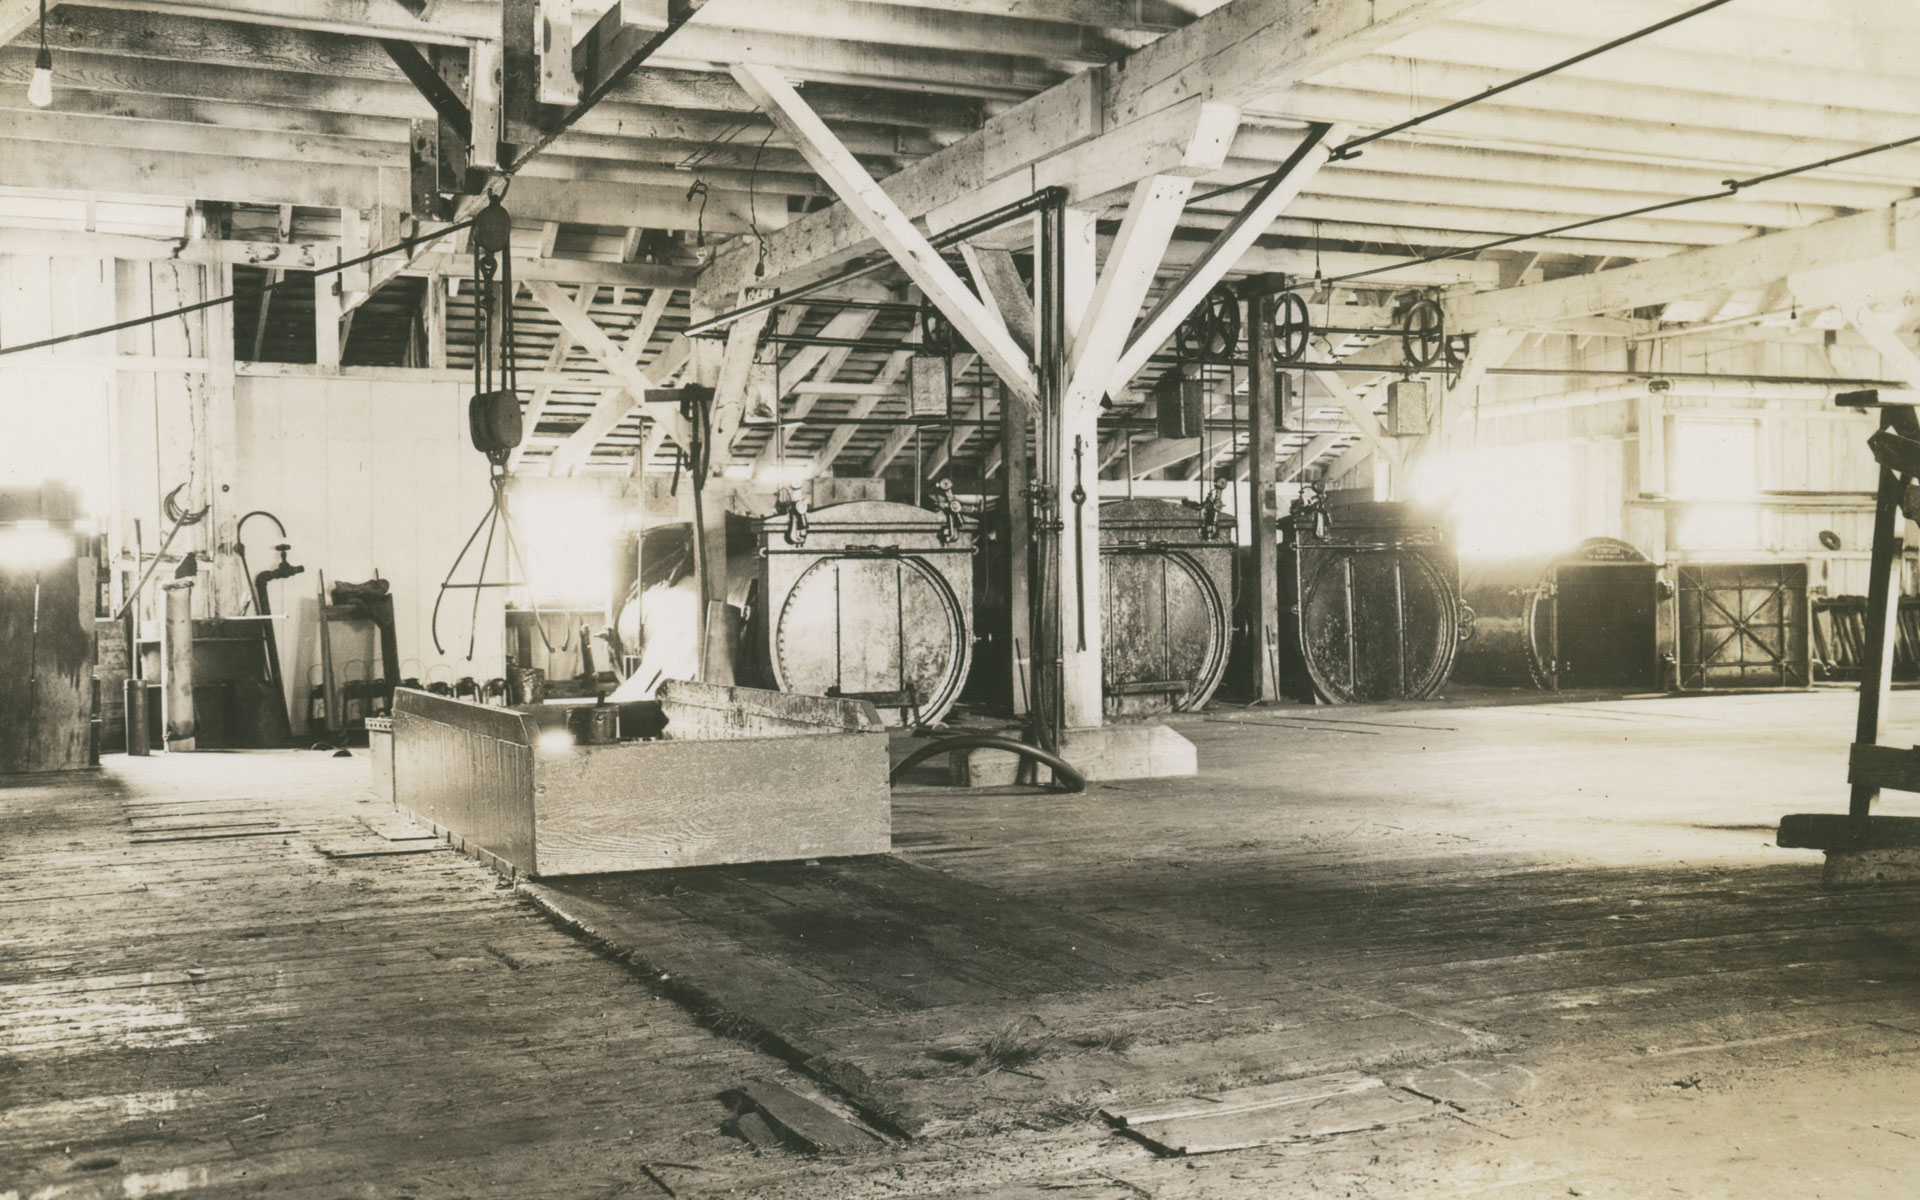 Interior of the Gulf of Georgia Cannery showing a large open space with three steam cookers and other machinery in the background.